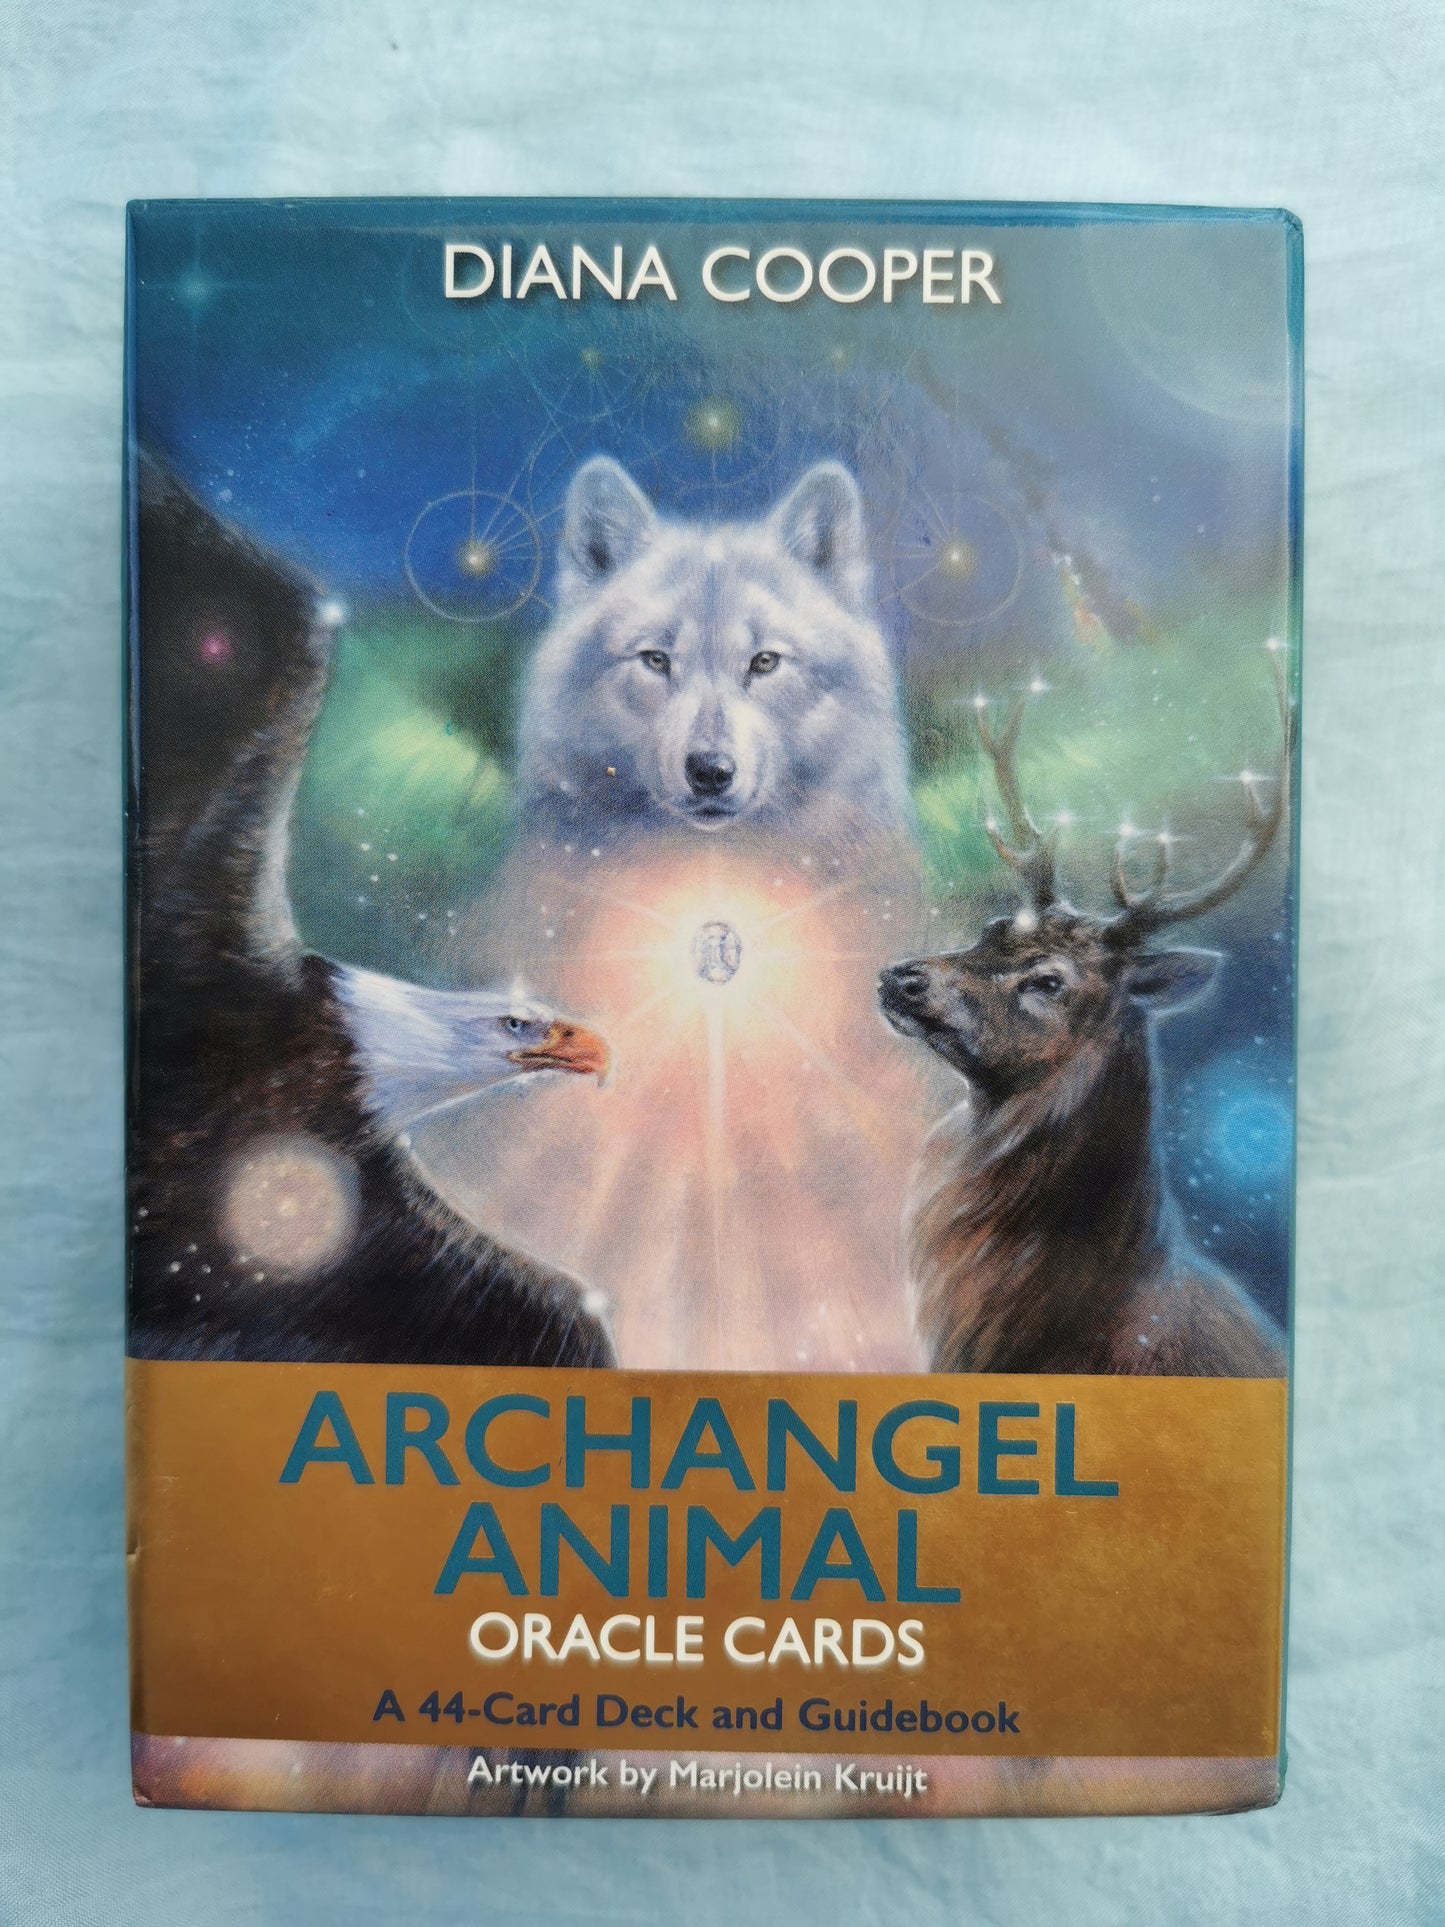 Archangel Animal - Oracle Cards